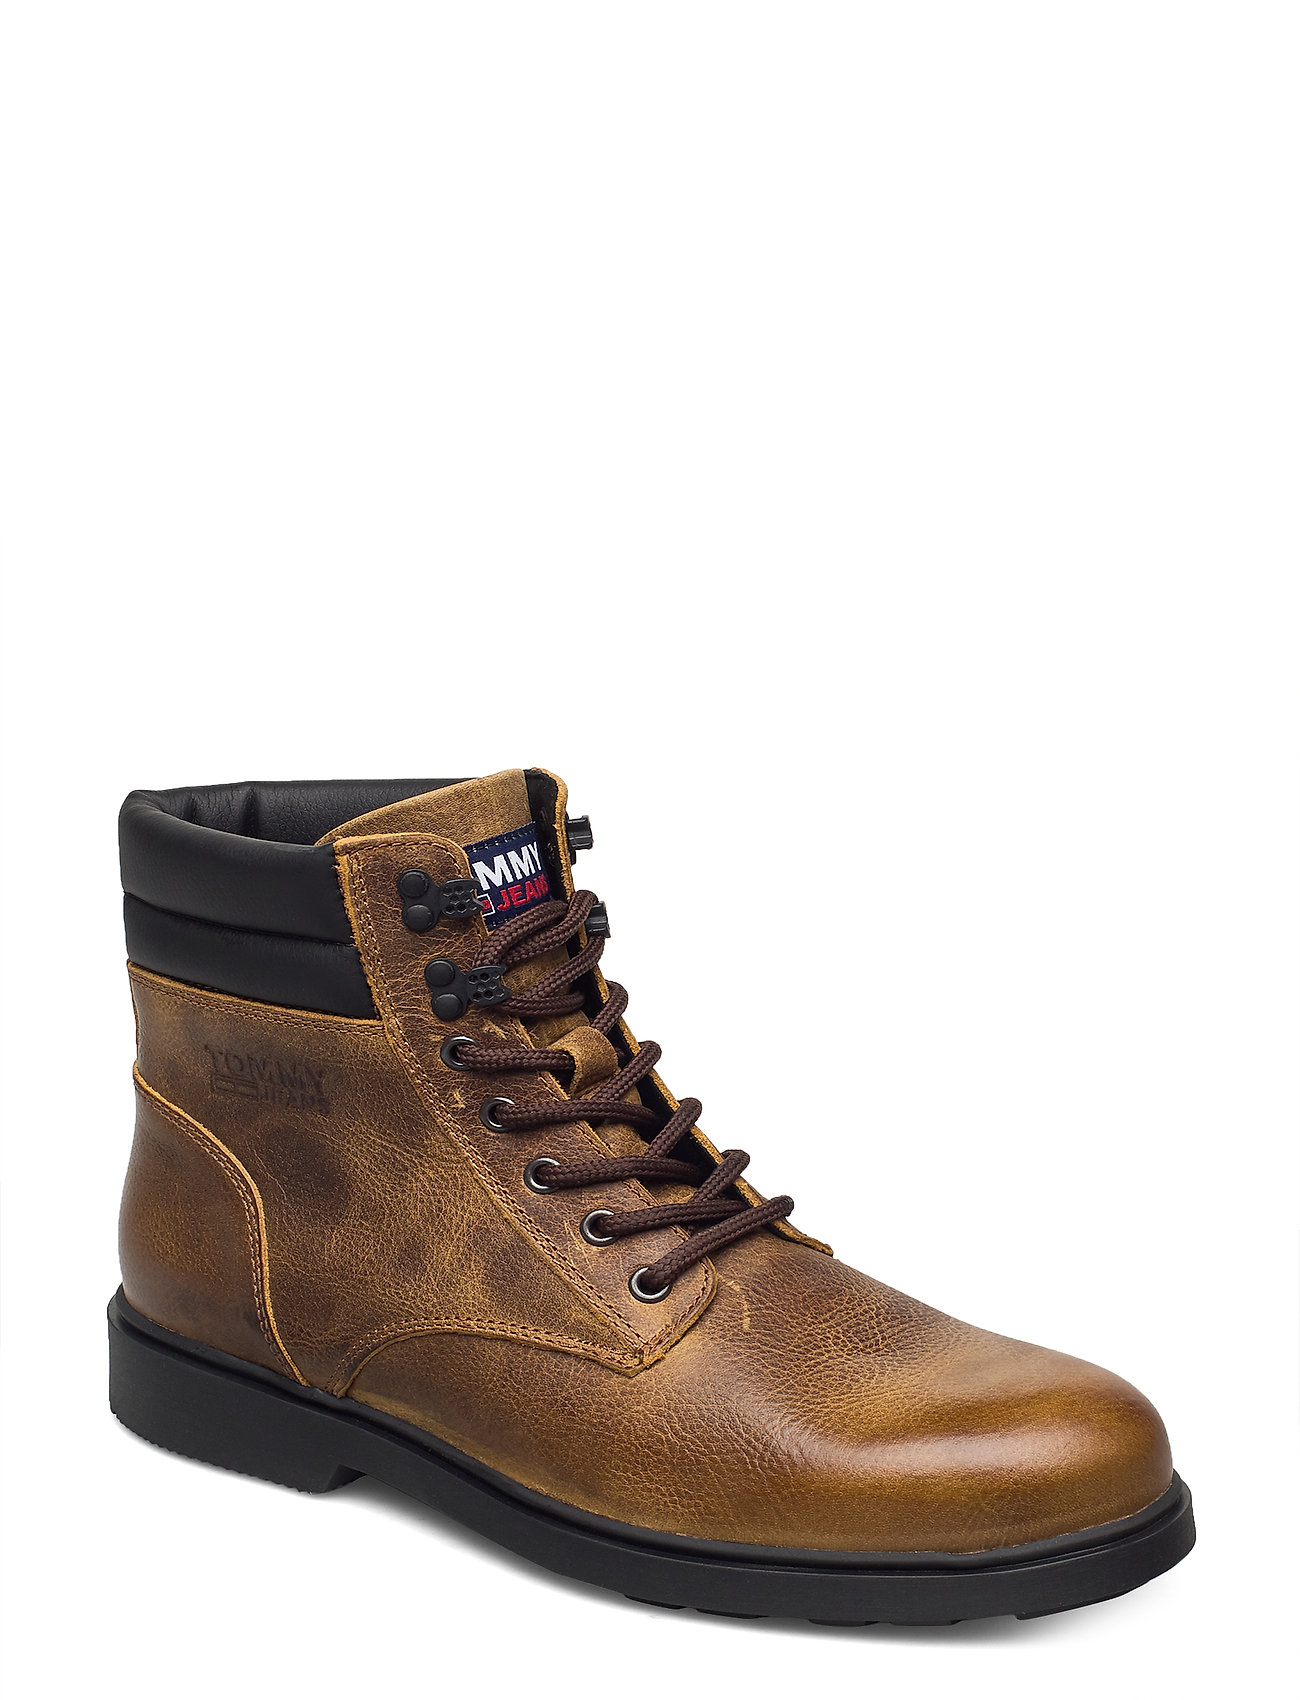 Sort Tommy Hilfiger Classic Jeans Lace Up Boot Snørestøvler Brun Tommy Hilfiger snørestøvler for - Pashion.dk